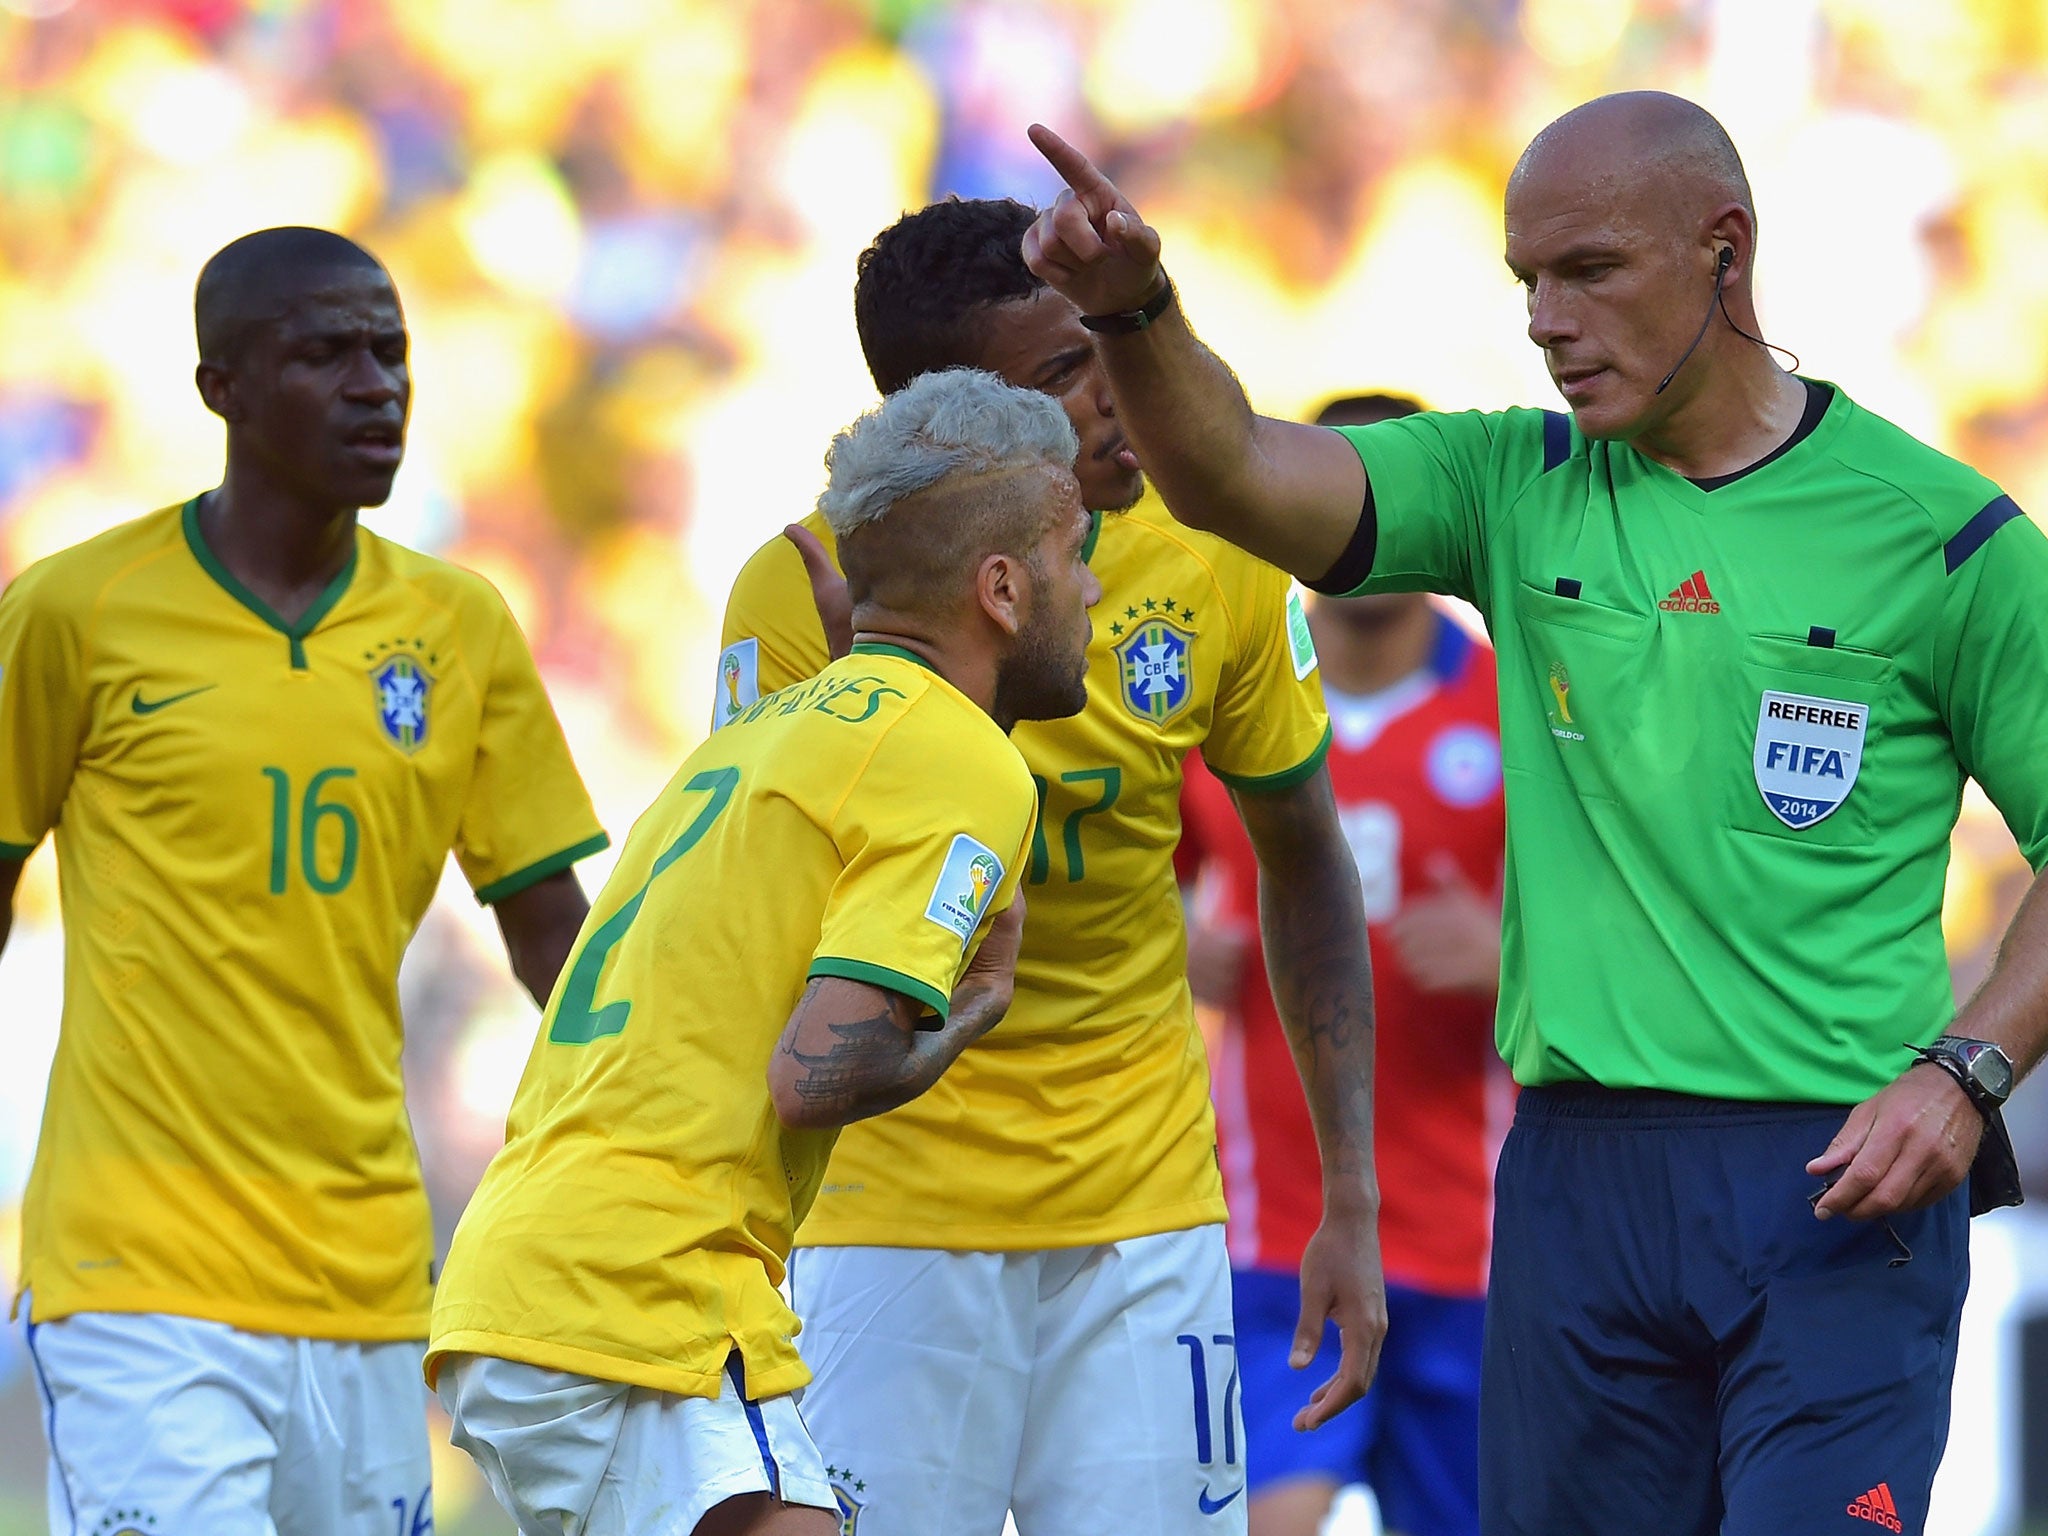 Brazil’s Danny Alves remonstrates with the referee Howard Webb during Saturday’s match